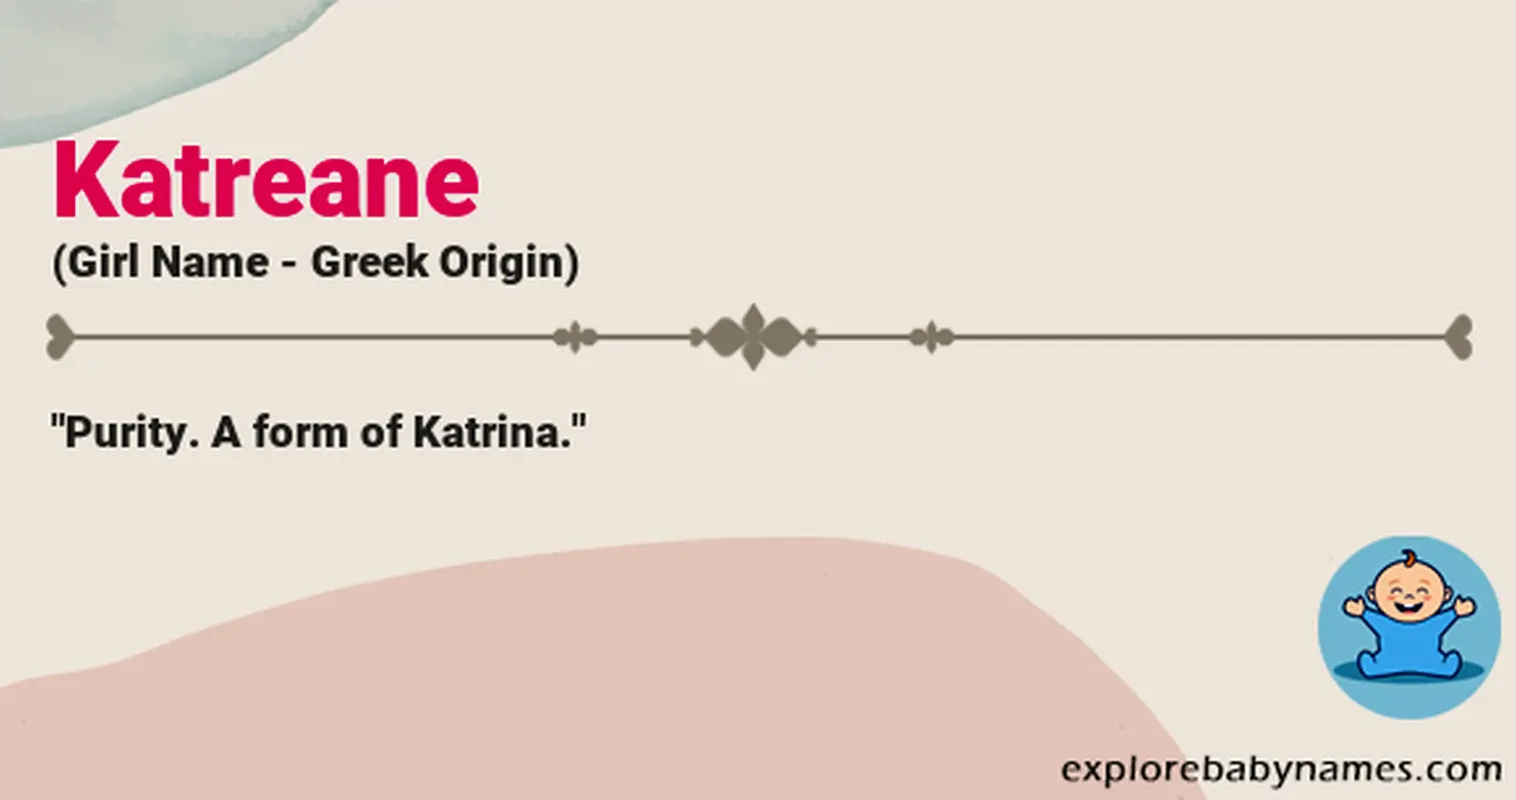 Meaning of Katreane